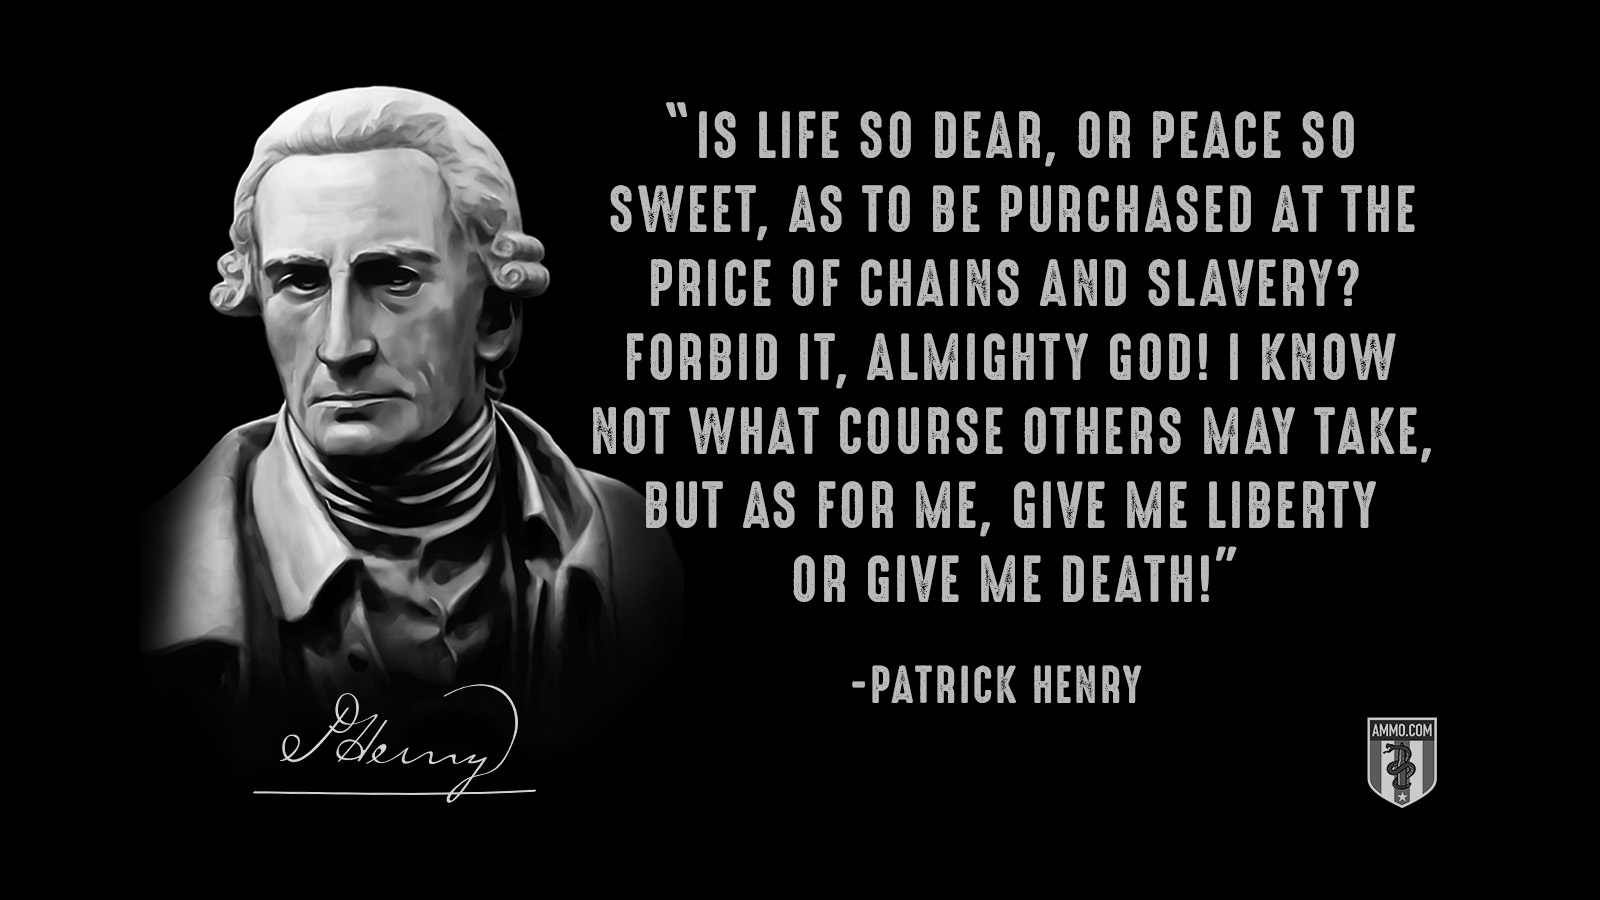 Patrick-Henry-Is-life-so-dear-or-peace-so-sweet-as-to-be-purchased-at-the-price-of-chains-and-slavery-Forbid-it-almighty-God-I-know-not-what-course-others-may-take-but-as-for-me-give-me-liberty-or-give-me-death.jpg?profile=RESIZE_710x